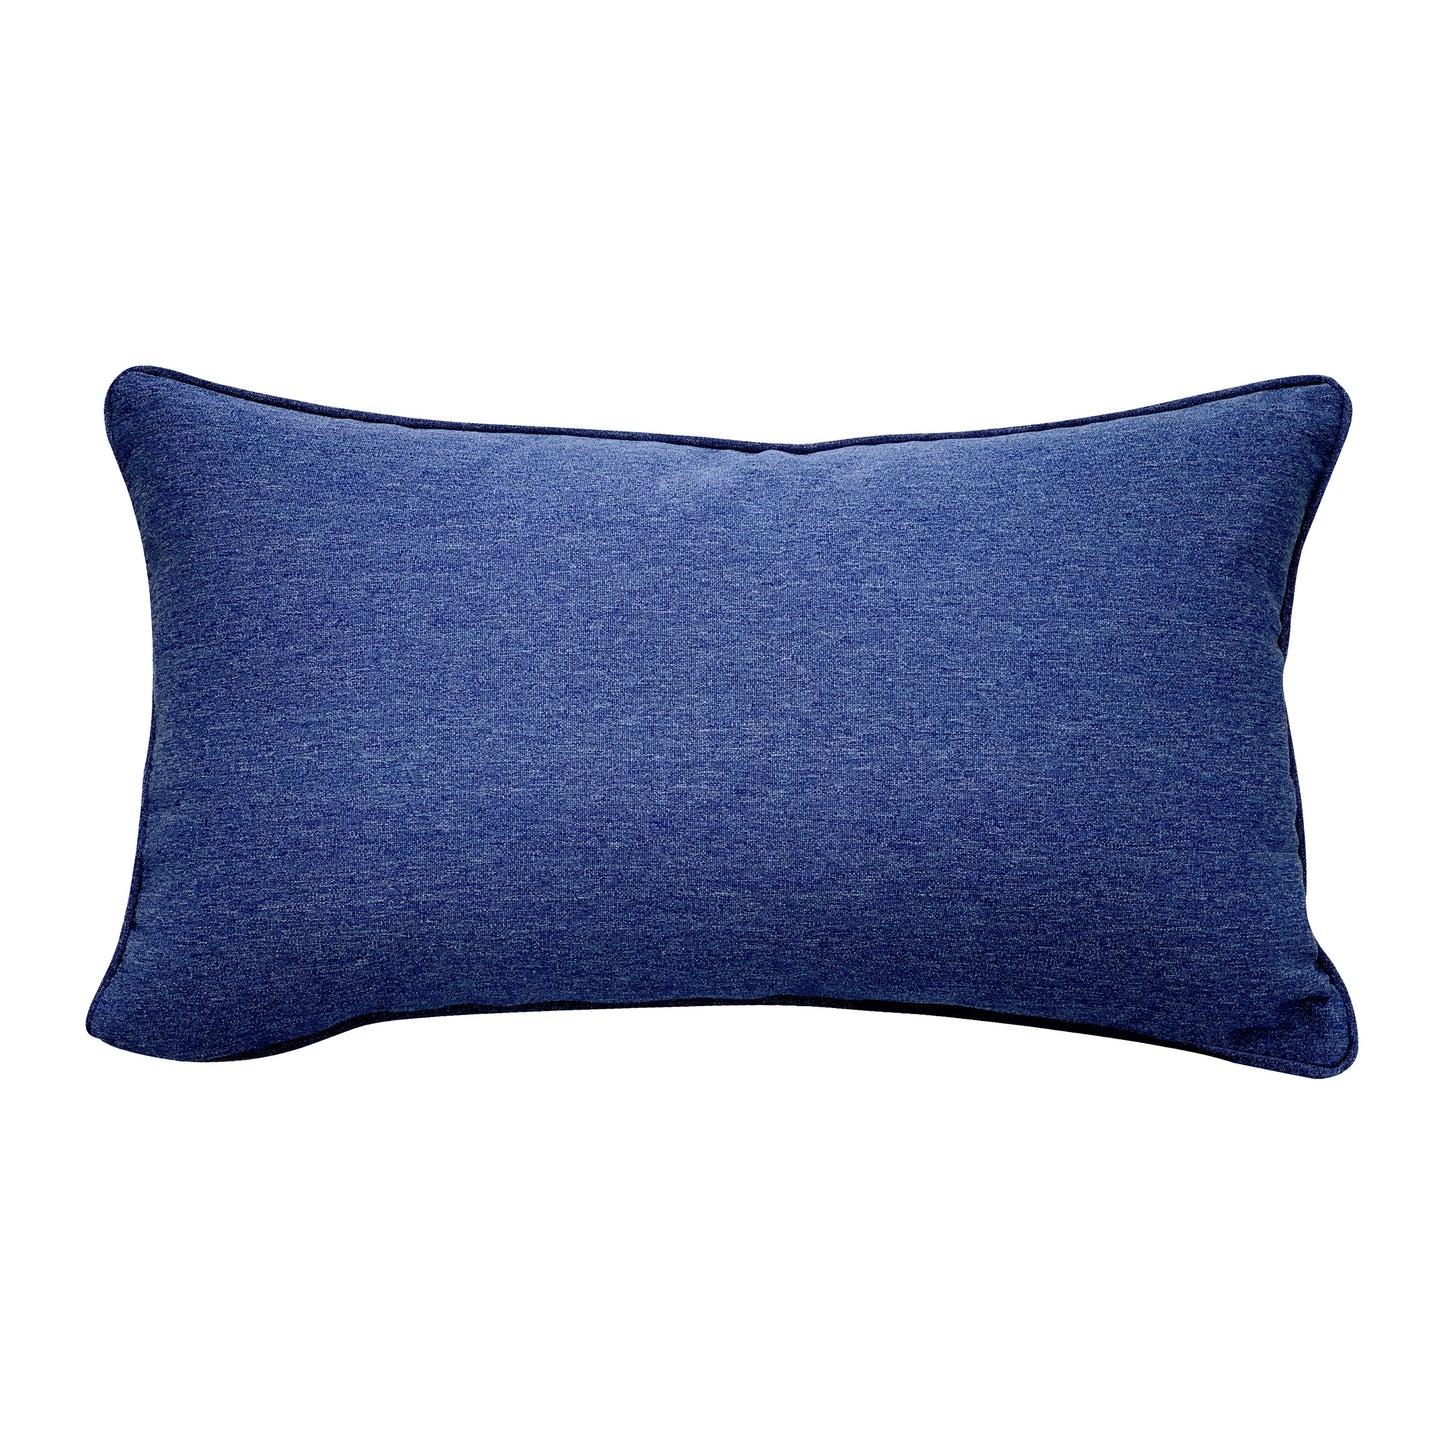 Solid blue fabric; back of the Indigo Seahorse pillow.